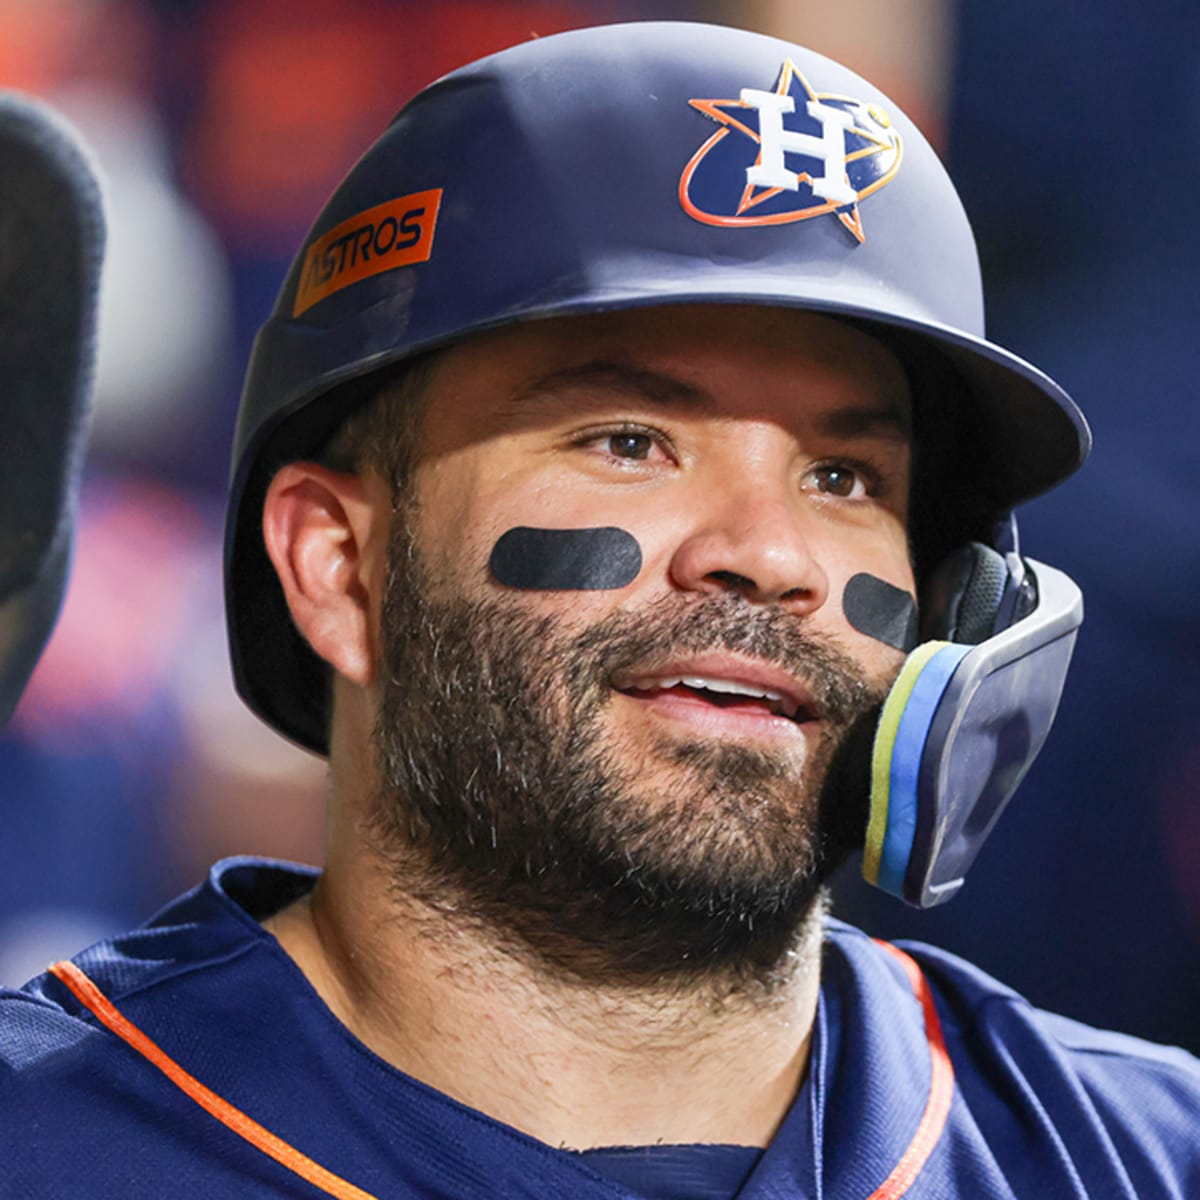 Altuve May Be the Face of the Astros, But He's Not the Face of